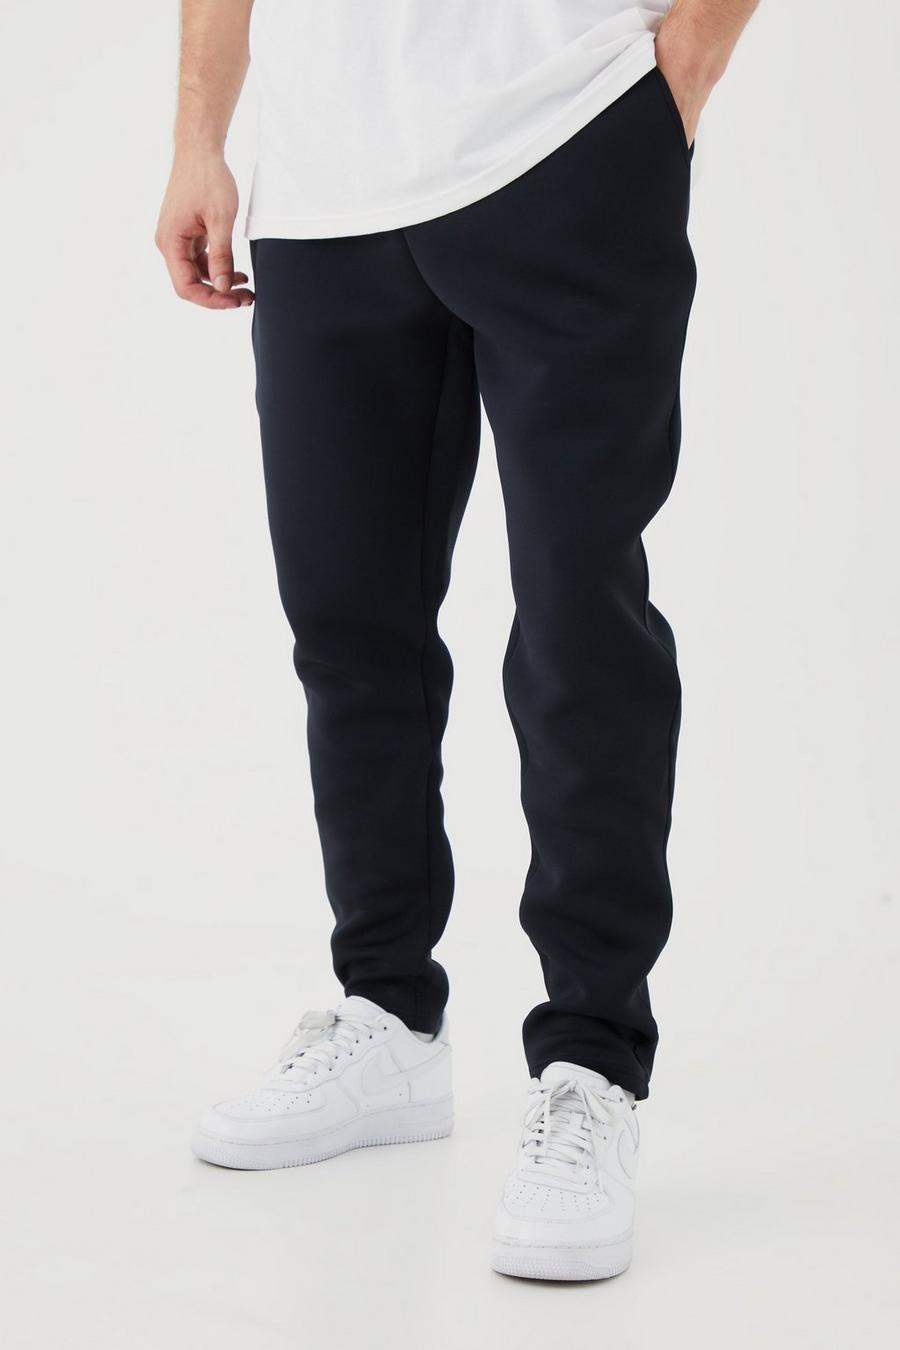 Black Tall Slim Tapered Cropped Bonded Scuba Sweatpant